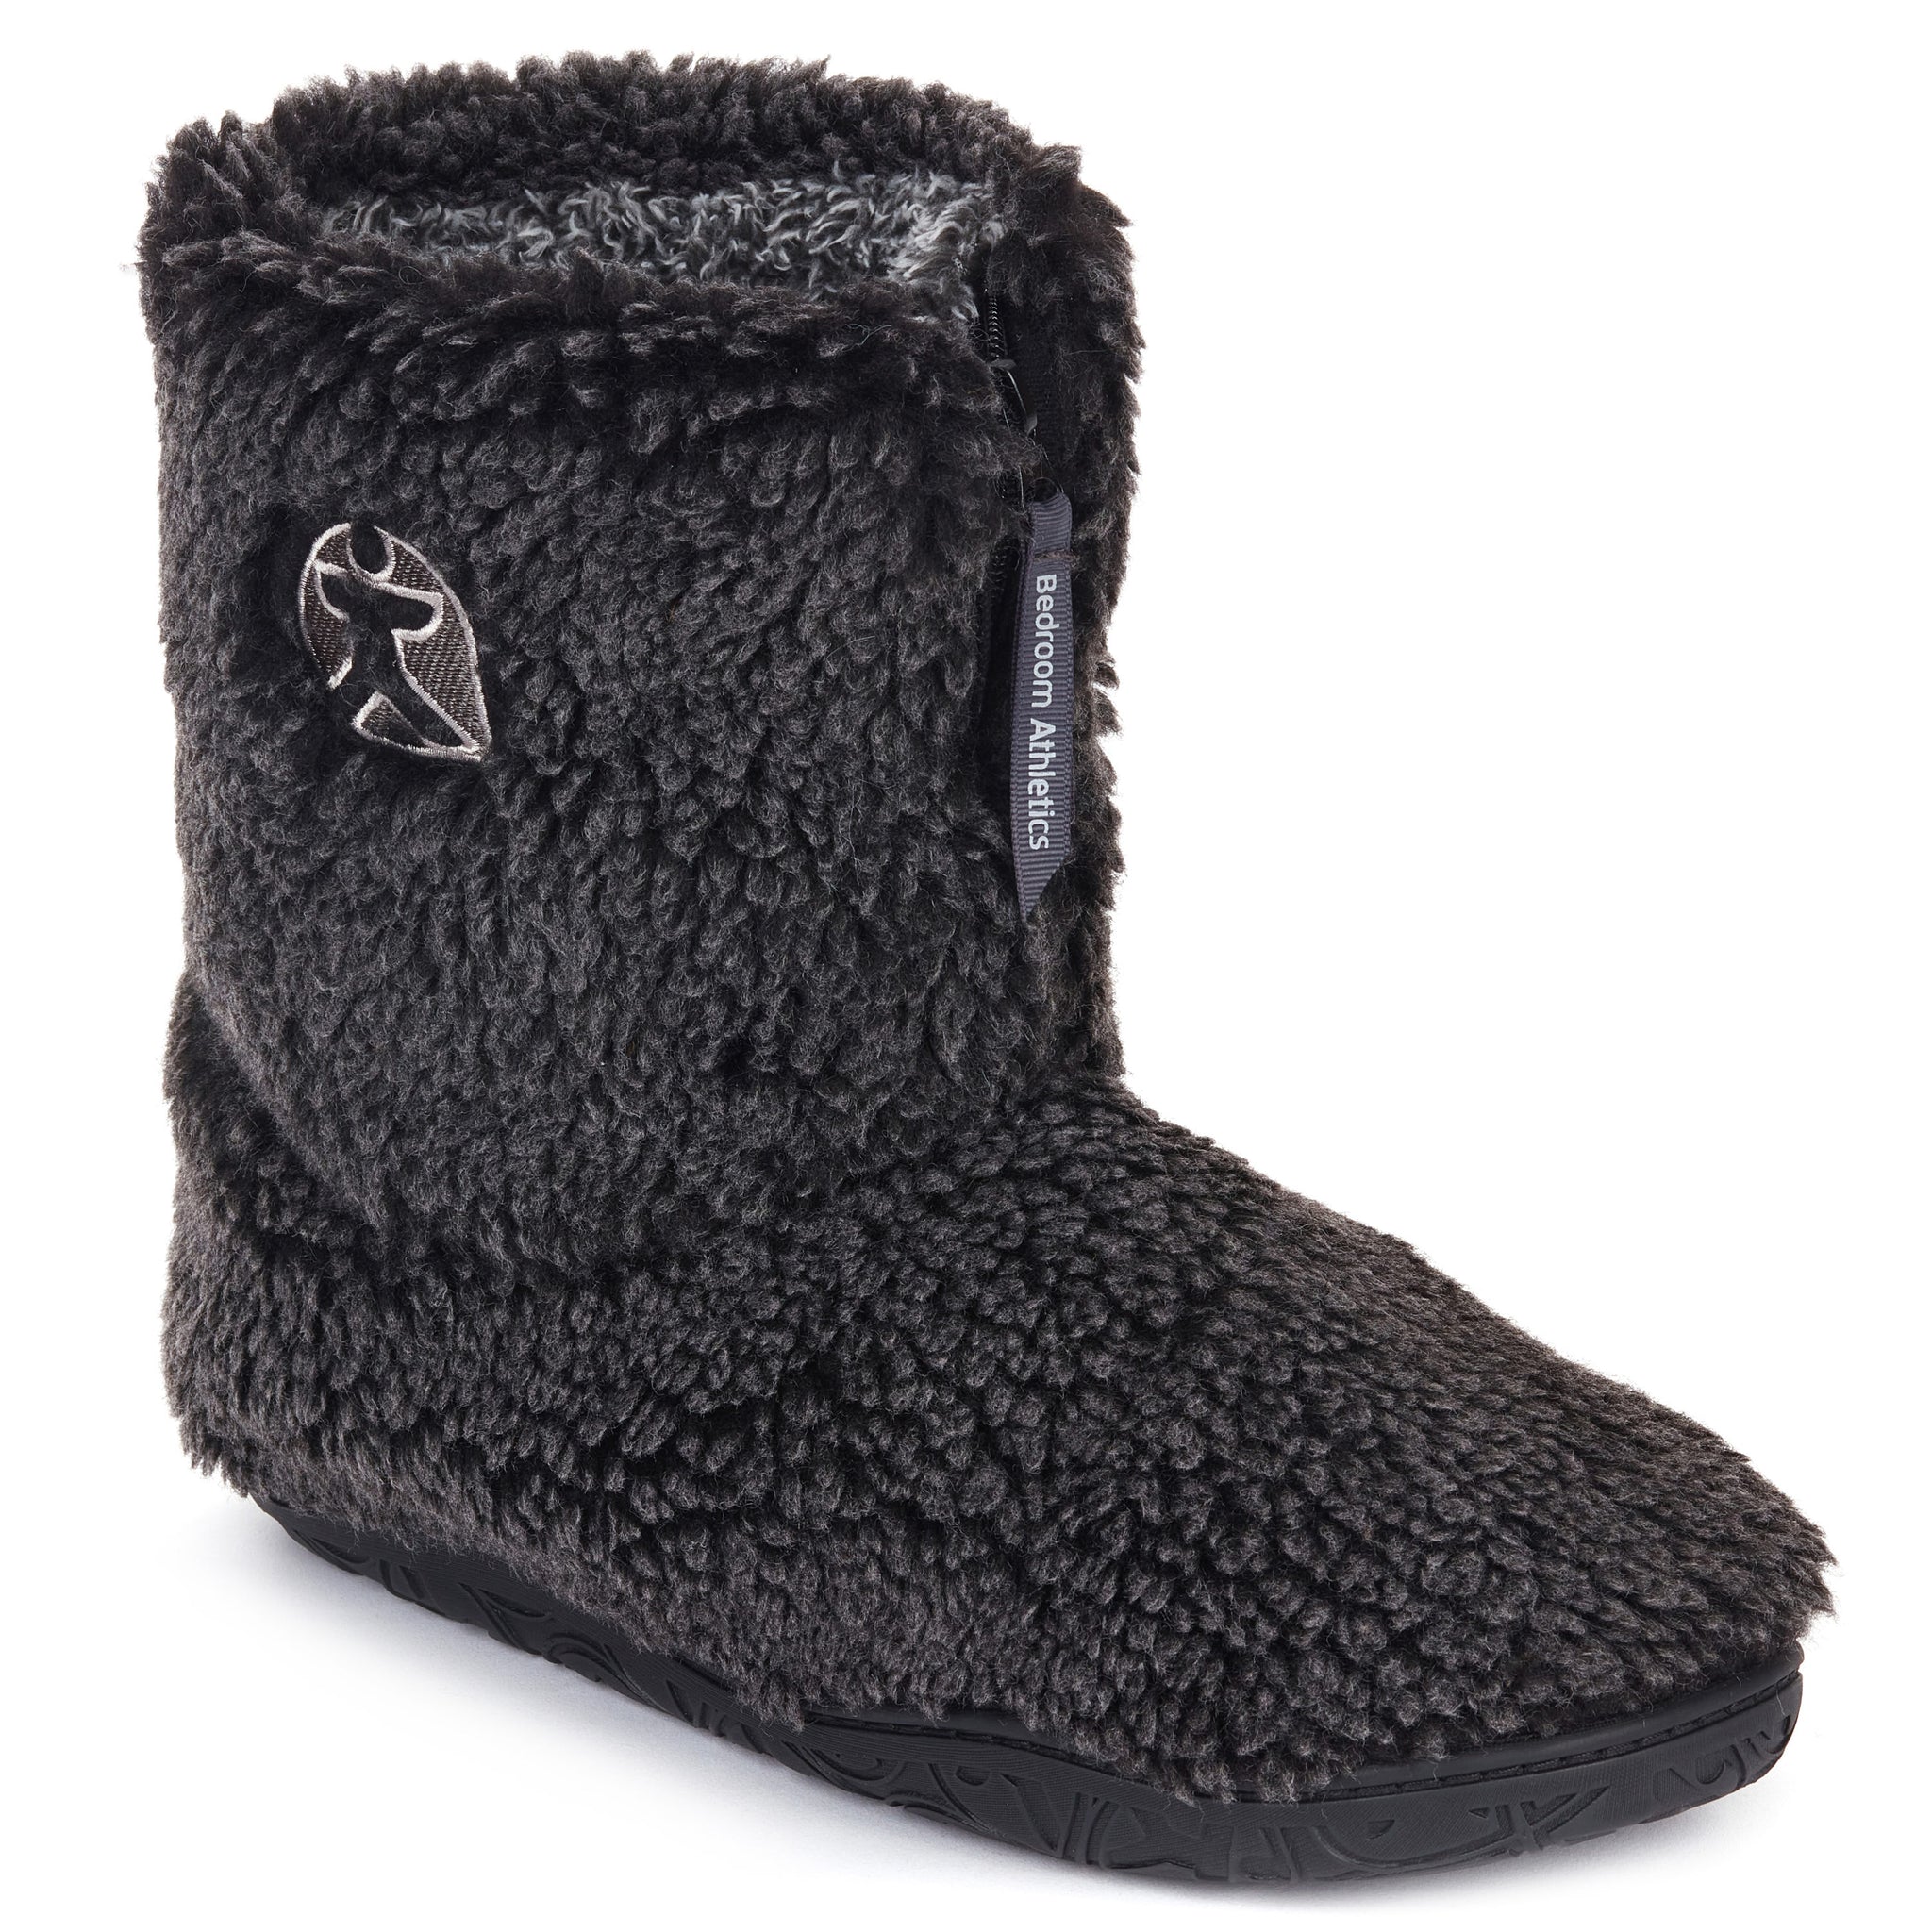 Gosling - Snow Tipped Sherpa Men's Slipper Boot - Washed Black ...